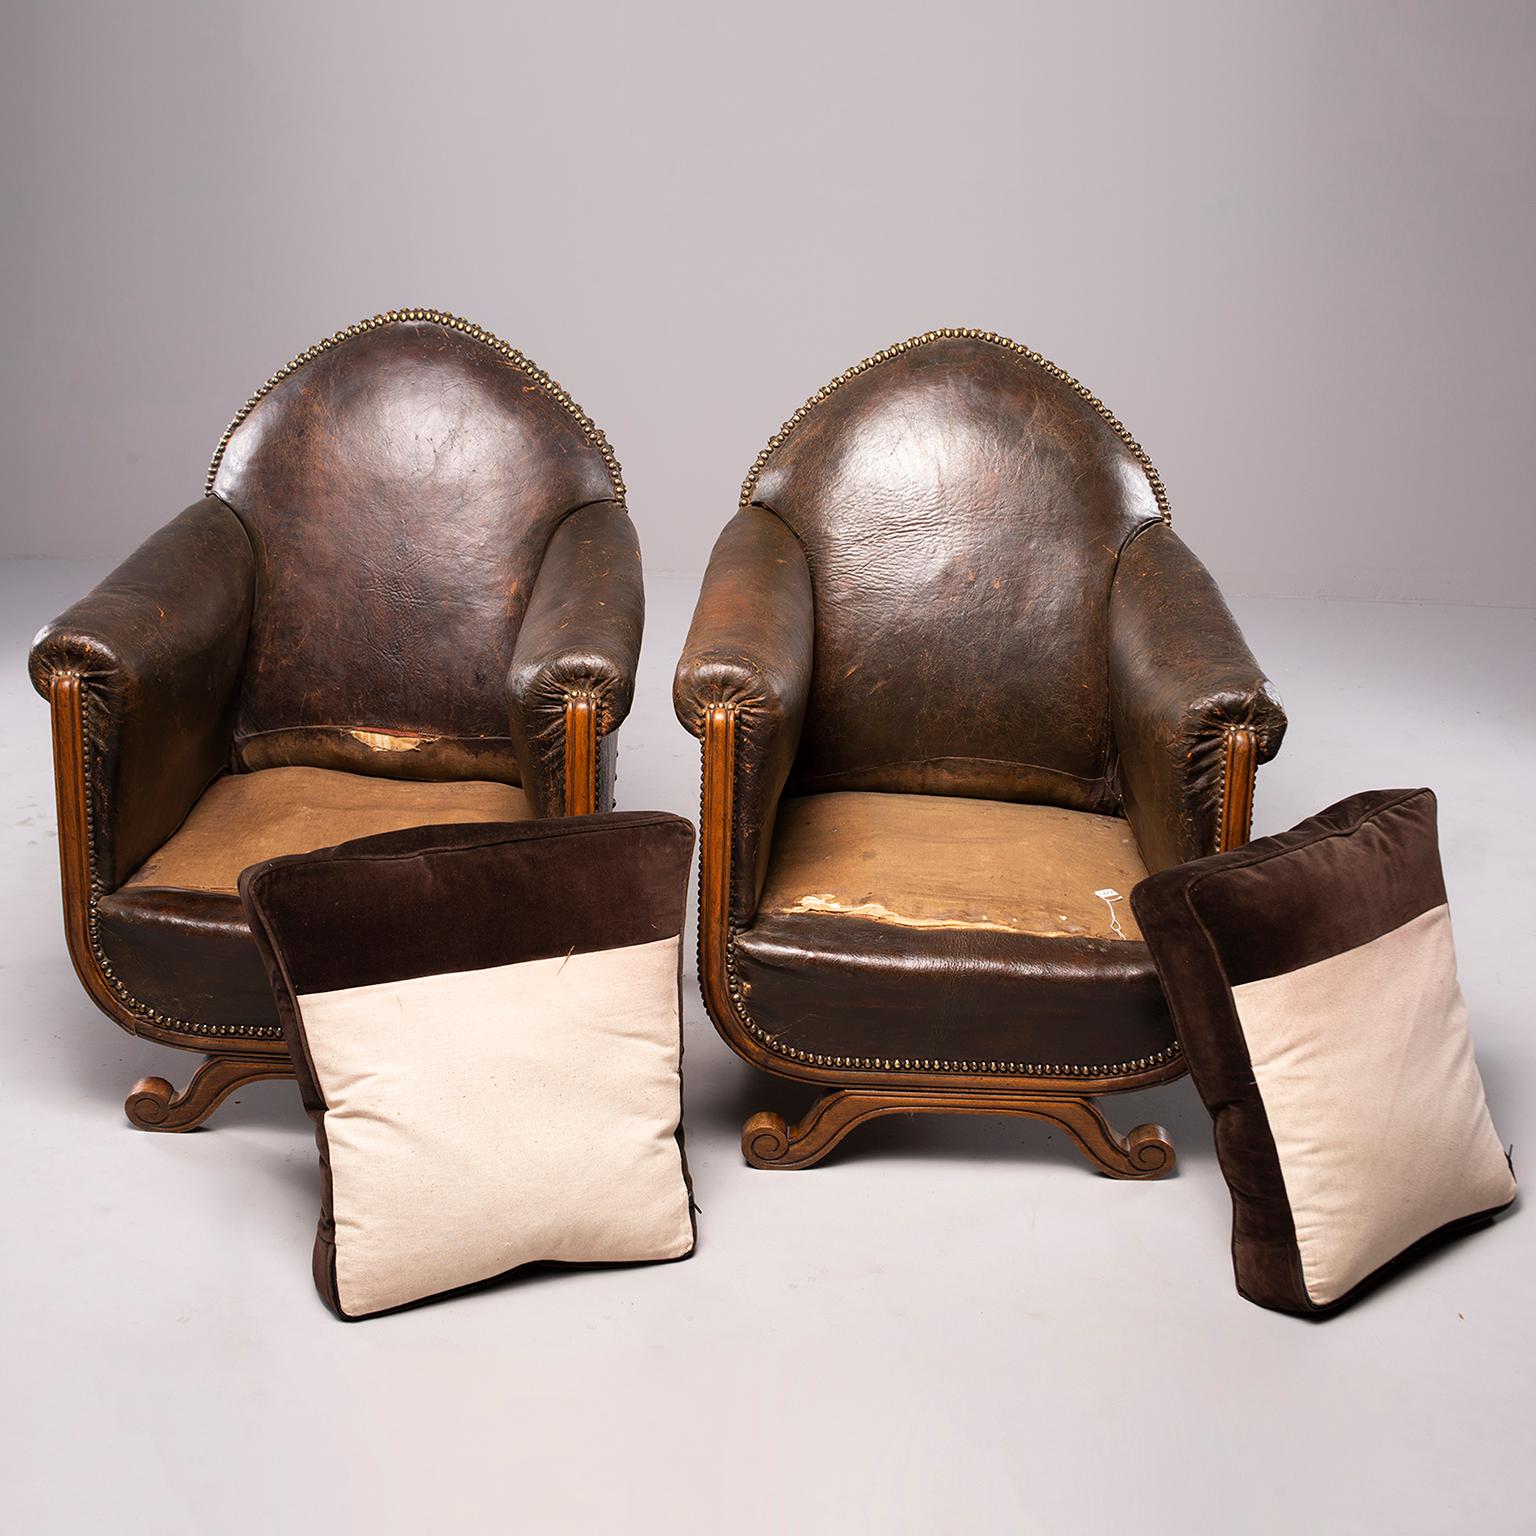 All Original French Art Deco Leather Club Chairs with Velvet Cushions (Französisch)